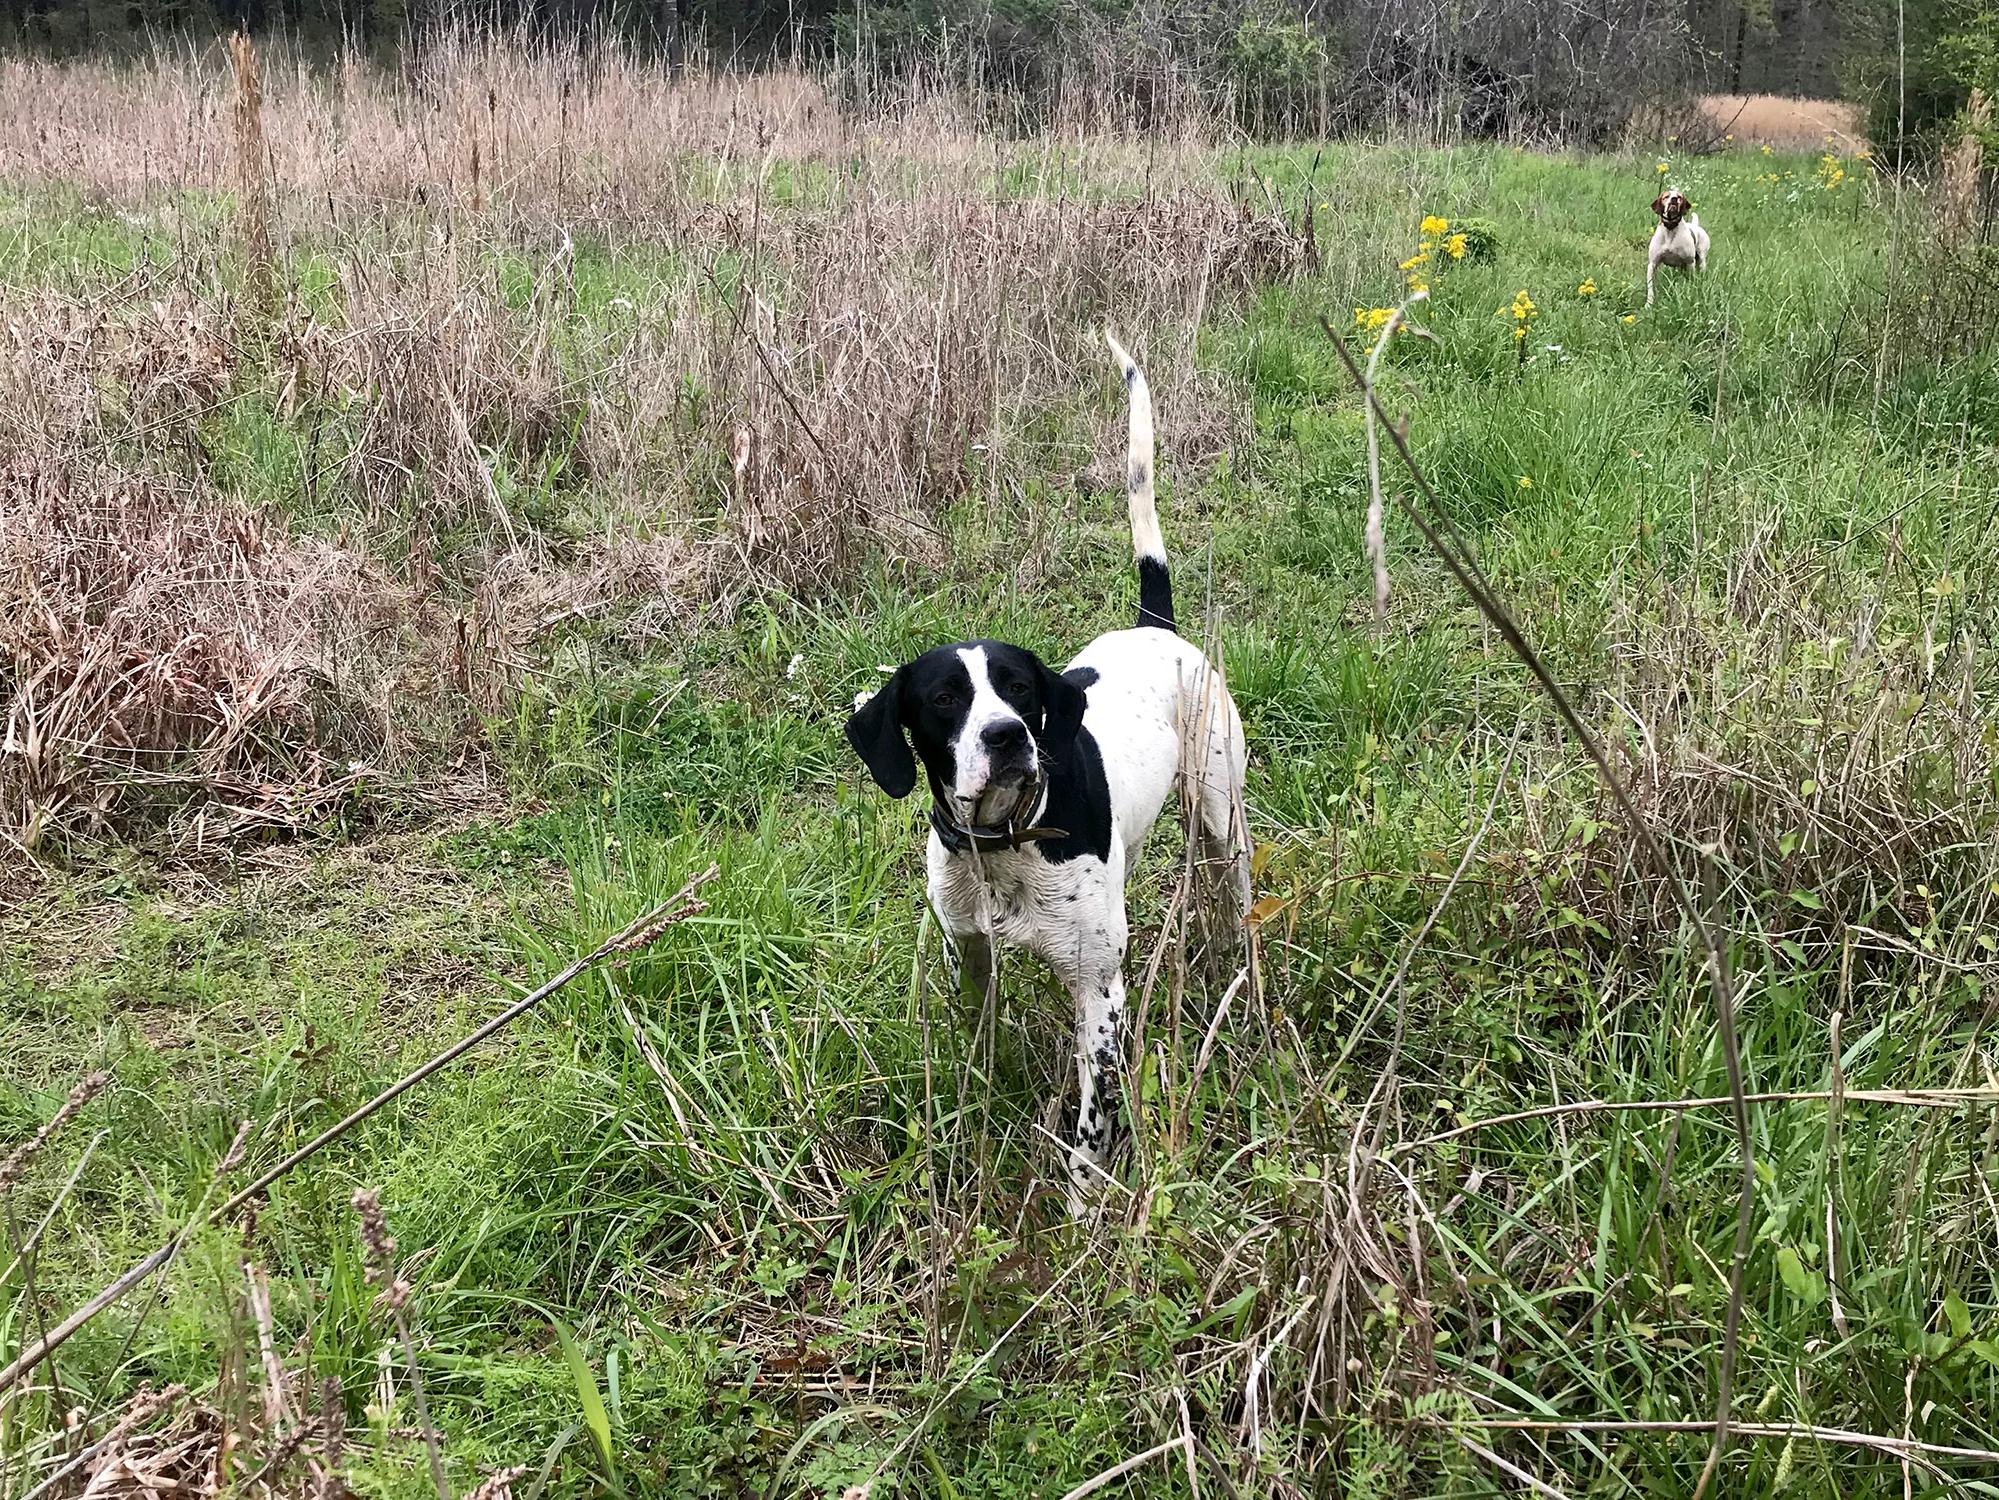 A black and white dog stands alert with his tail up and ears forward in tall grass with trees in the background.